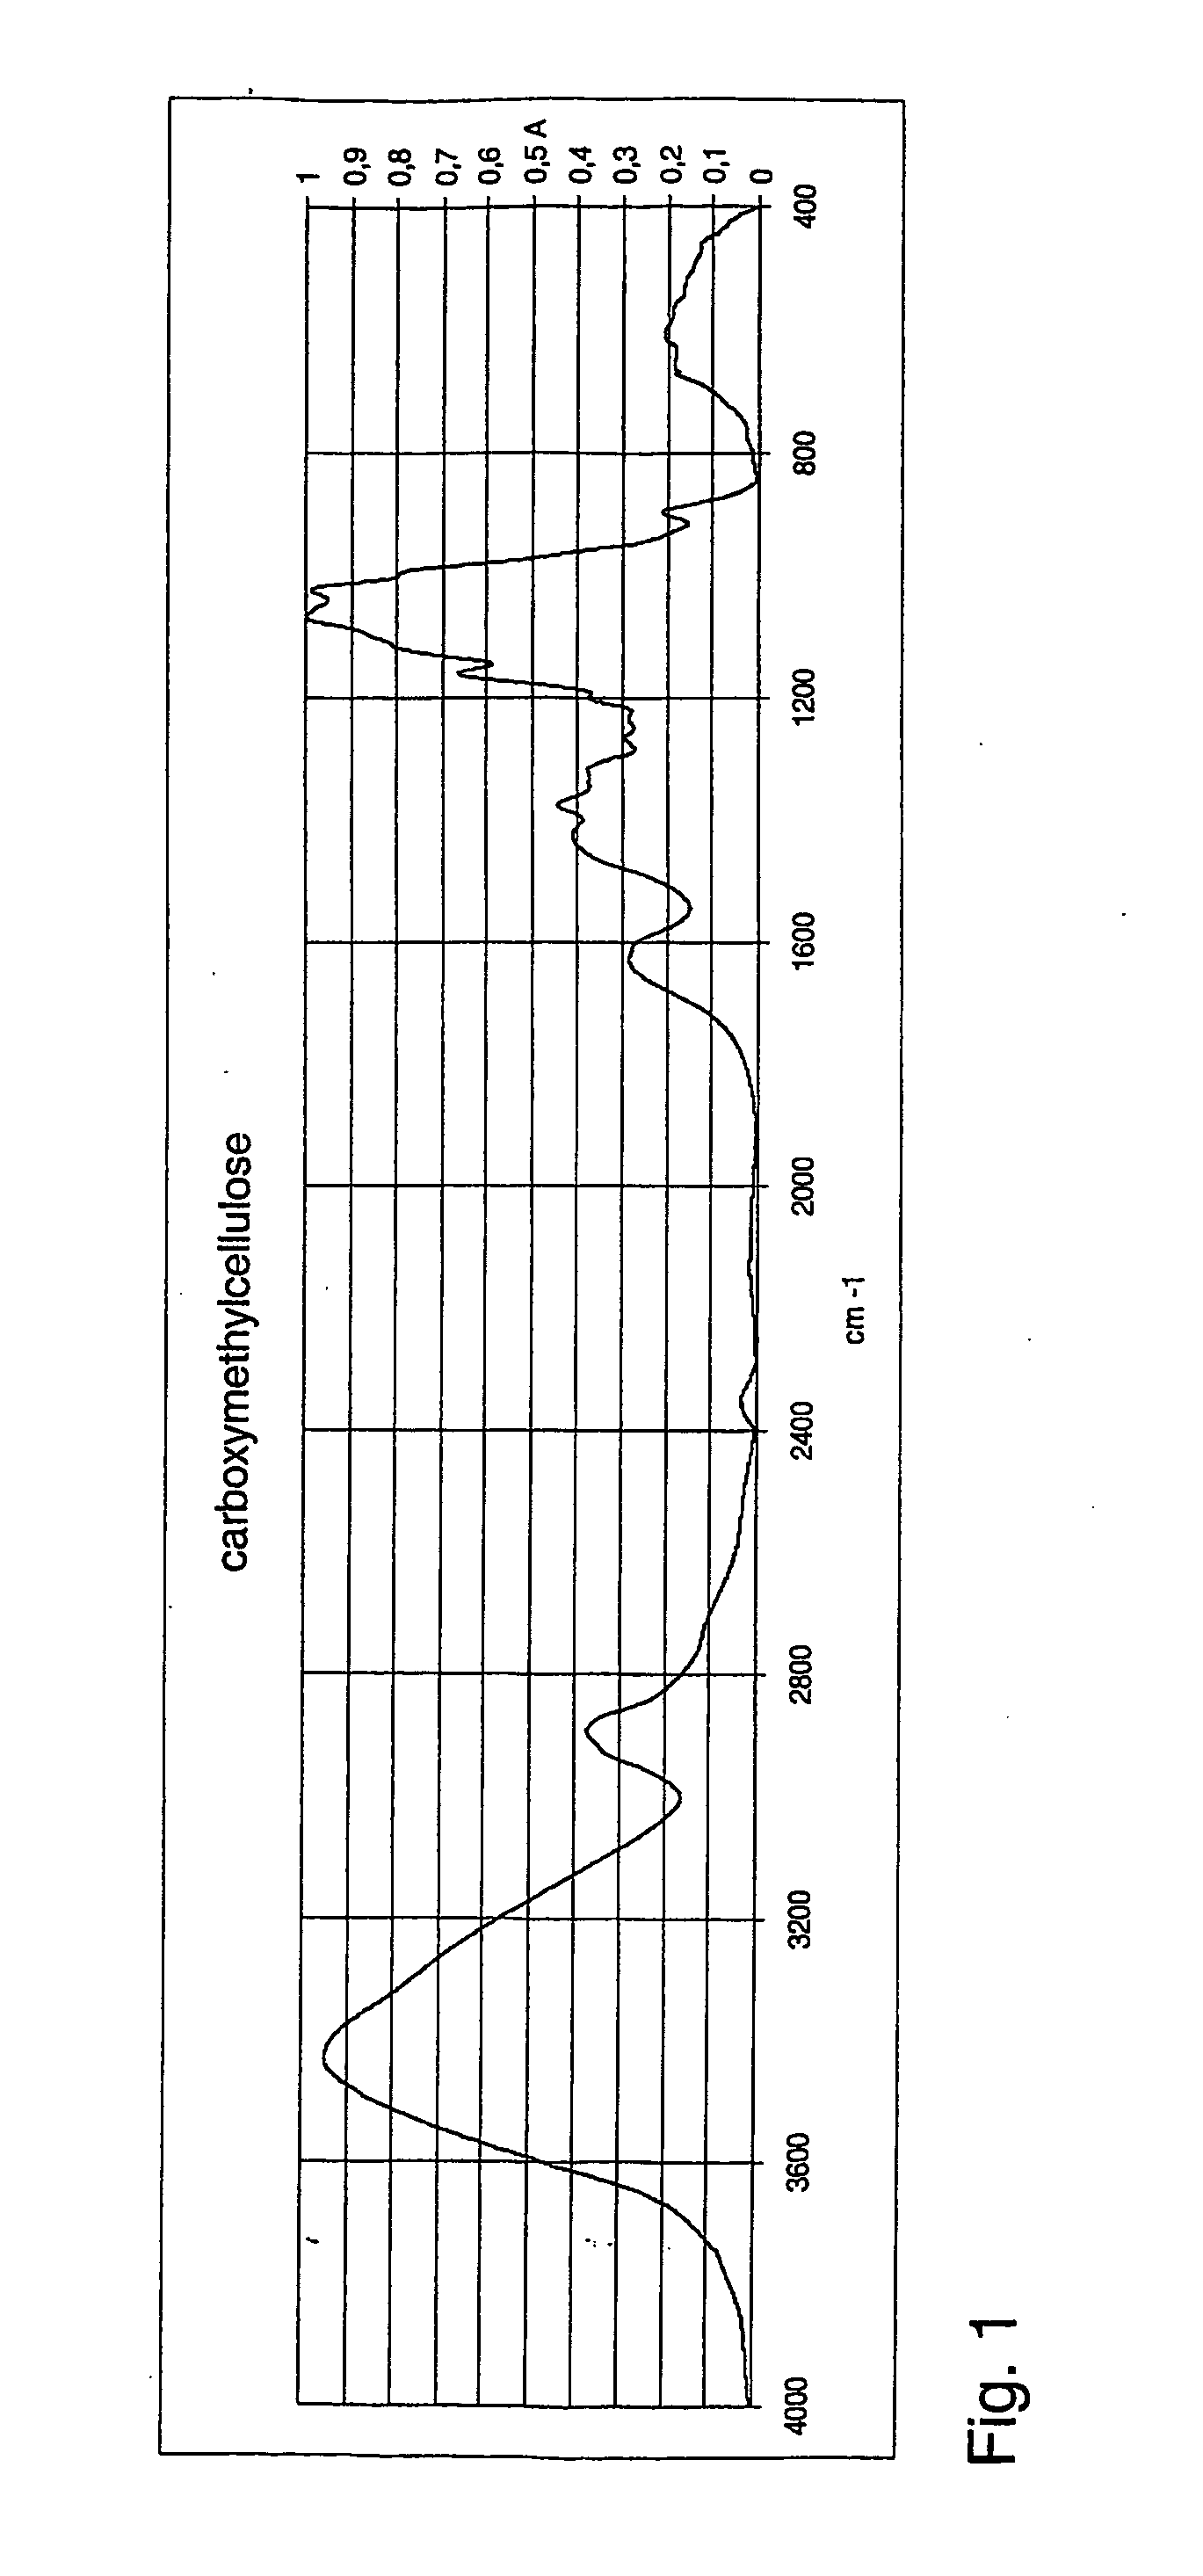 Method for preparing a cellulose ether